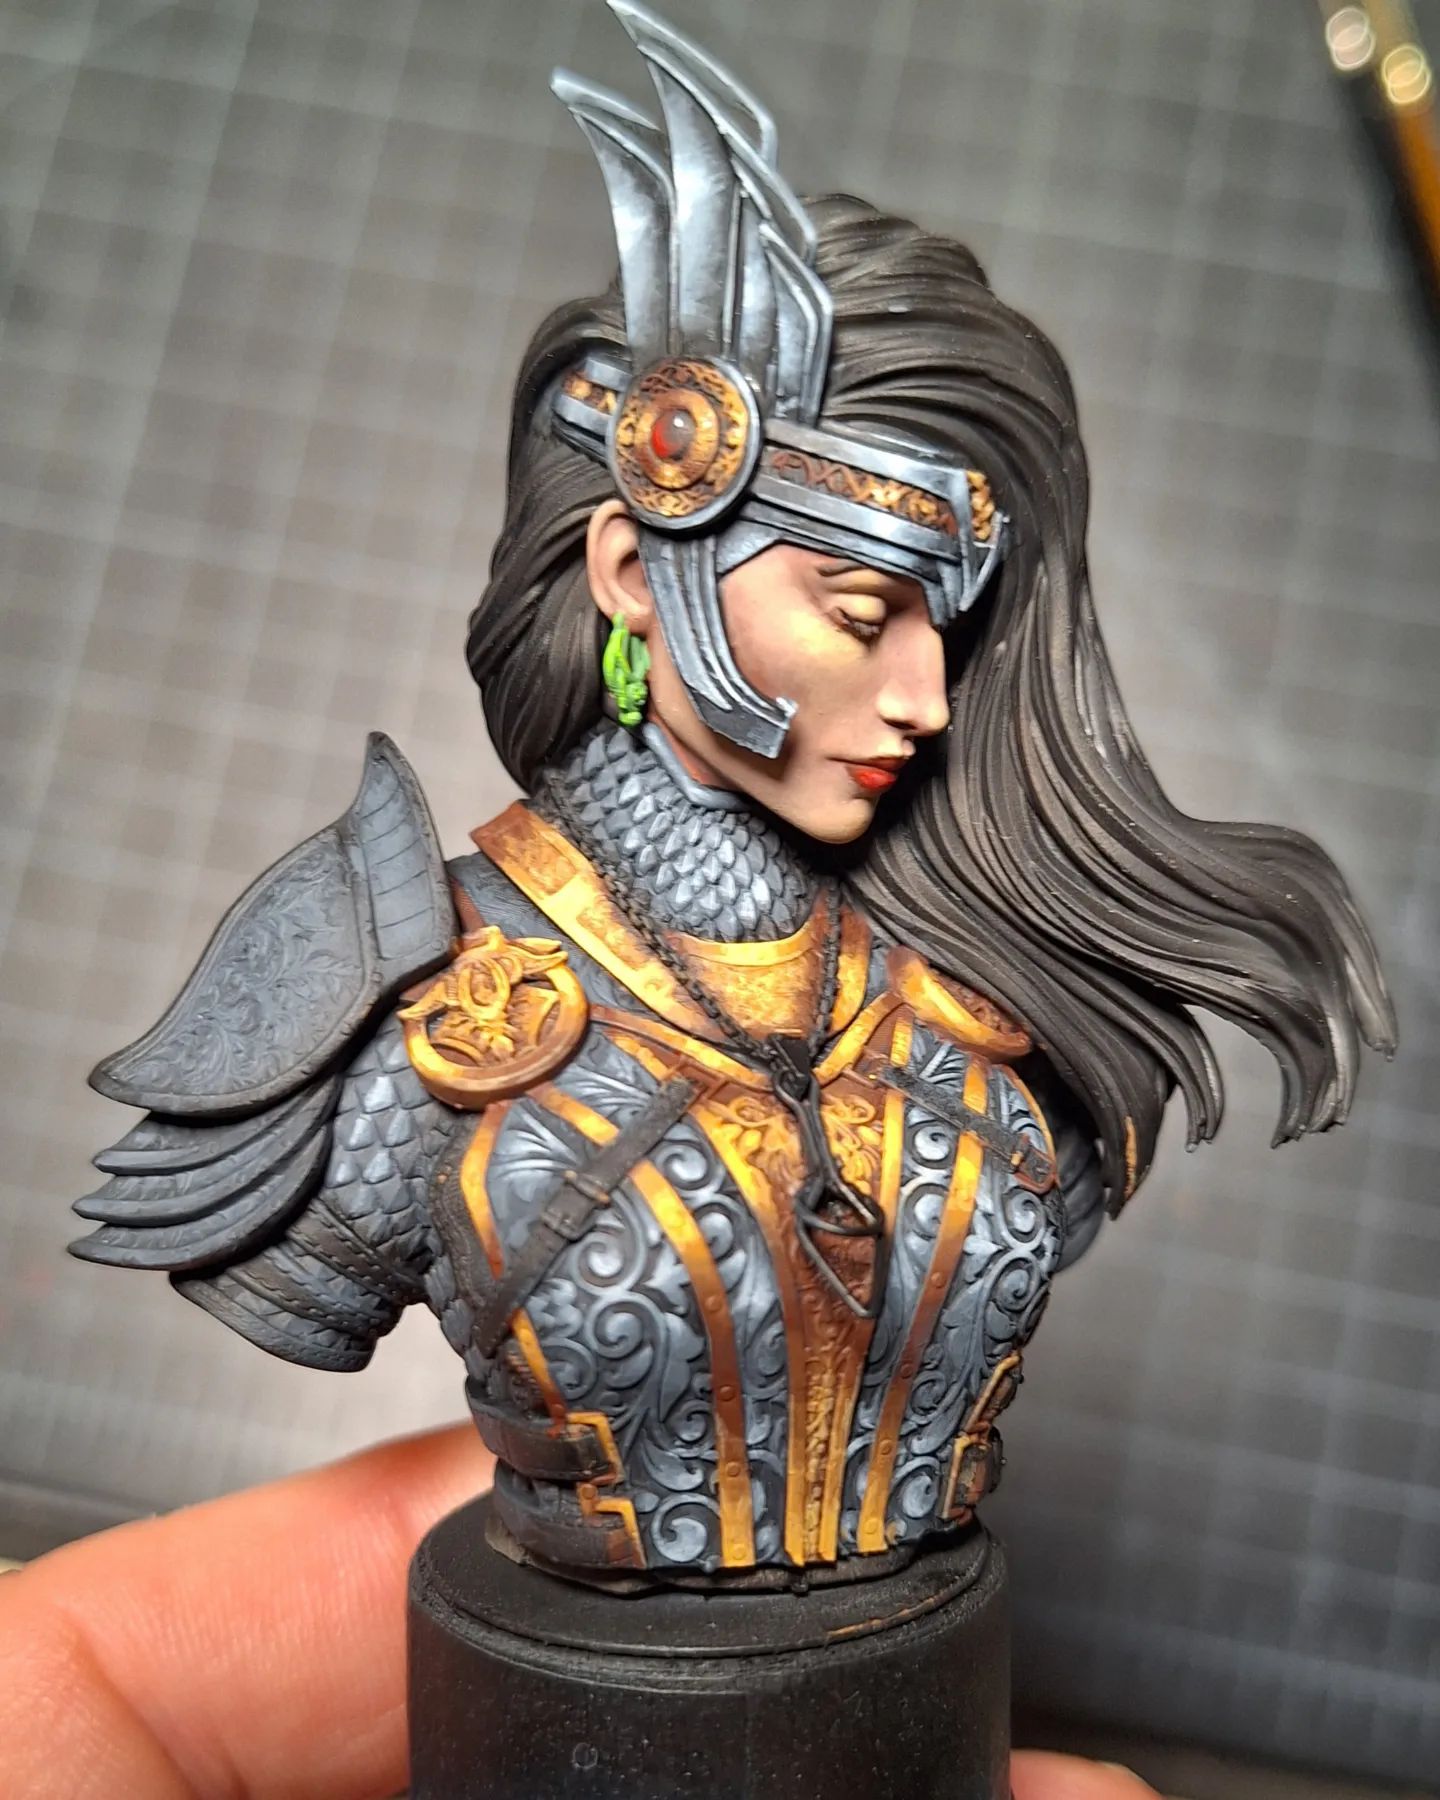 Work in progress #2 made a pendant out of brass wire #wip #miniatures #mini #miniature #bust #nonmetallicmetal #dnd #dndminiatures #knight #female #femaleknight #fighter #paladin